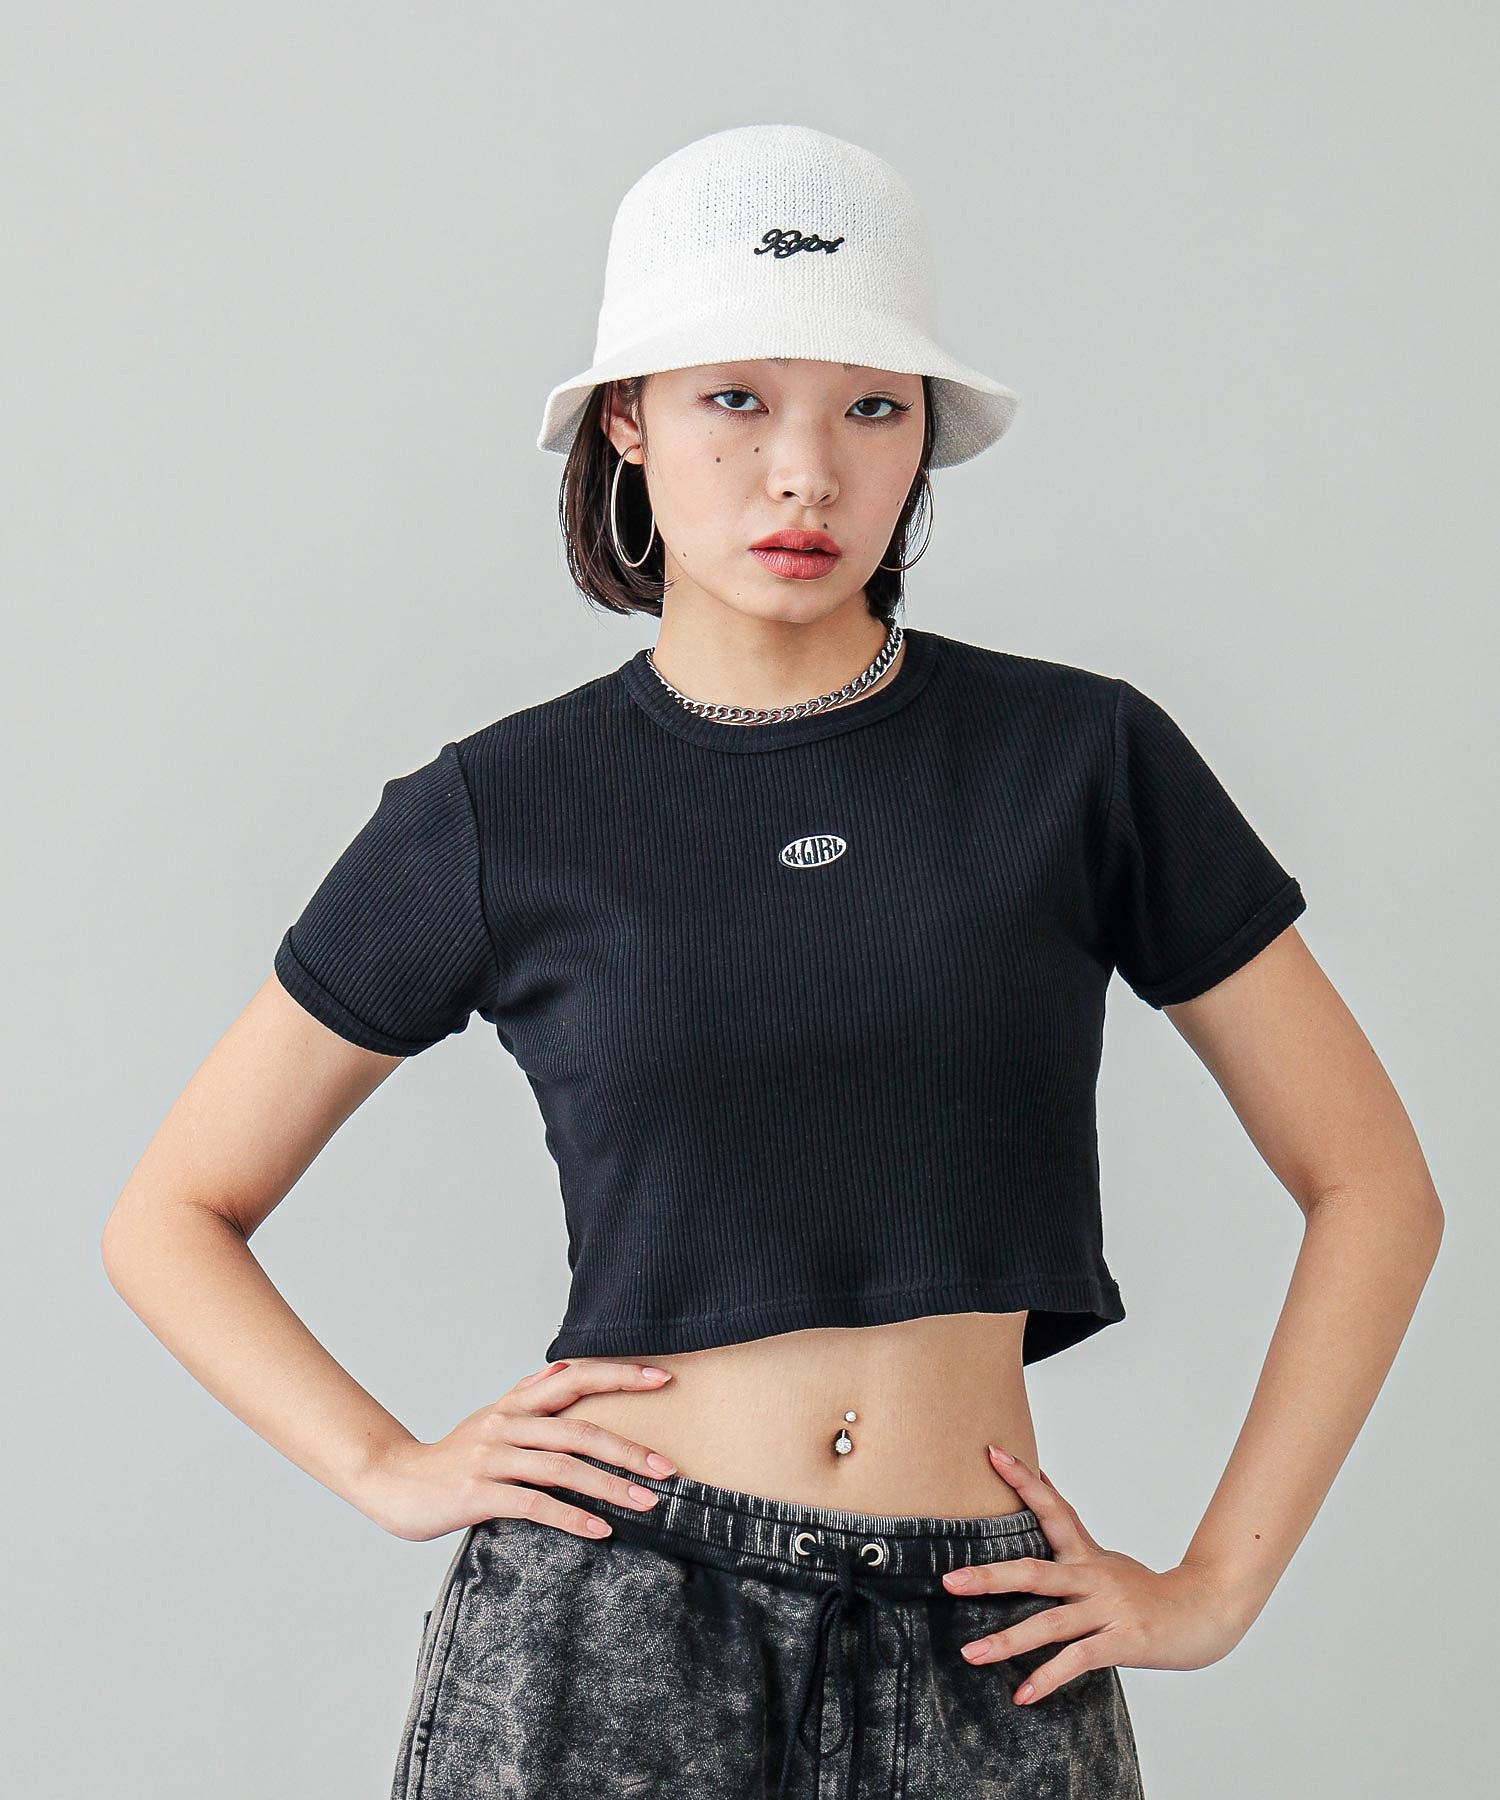 OVAL LOGO S/S TOP